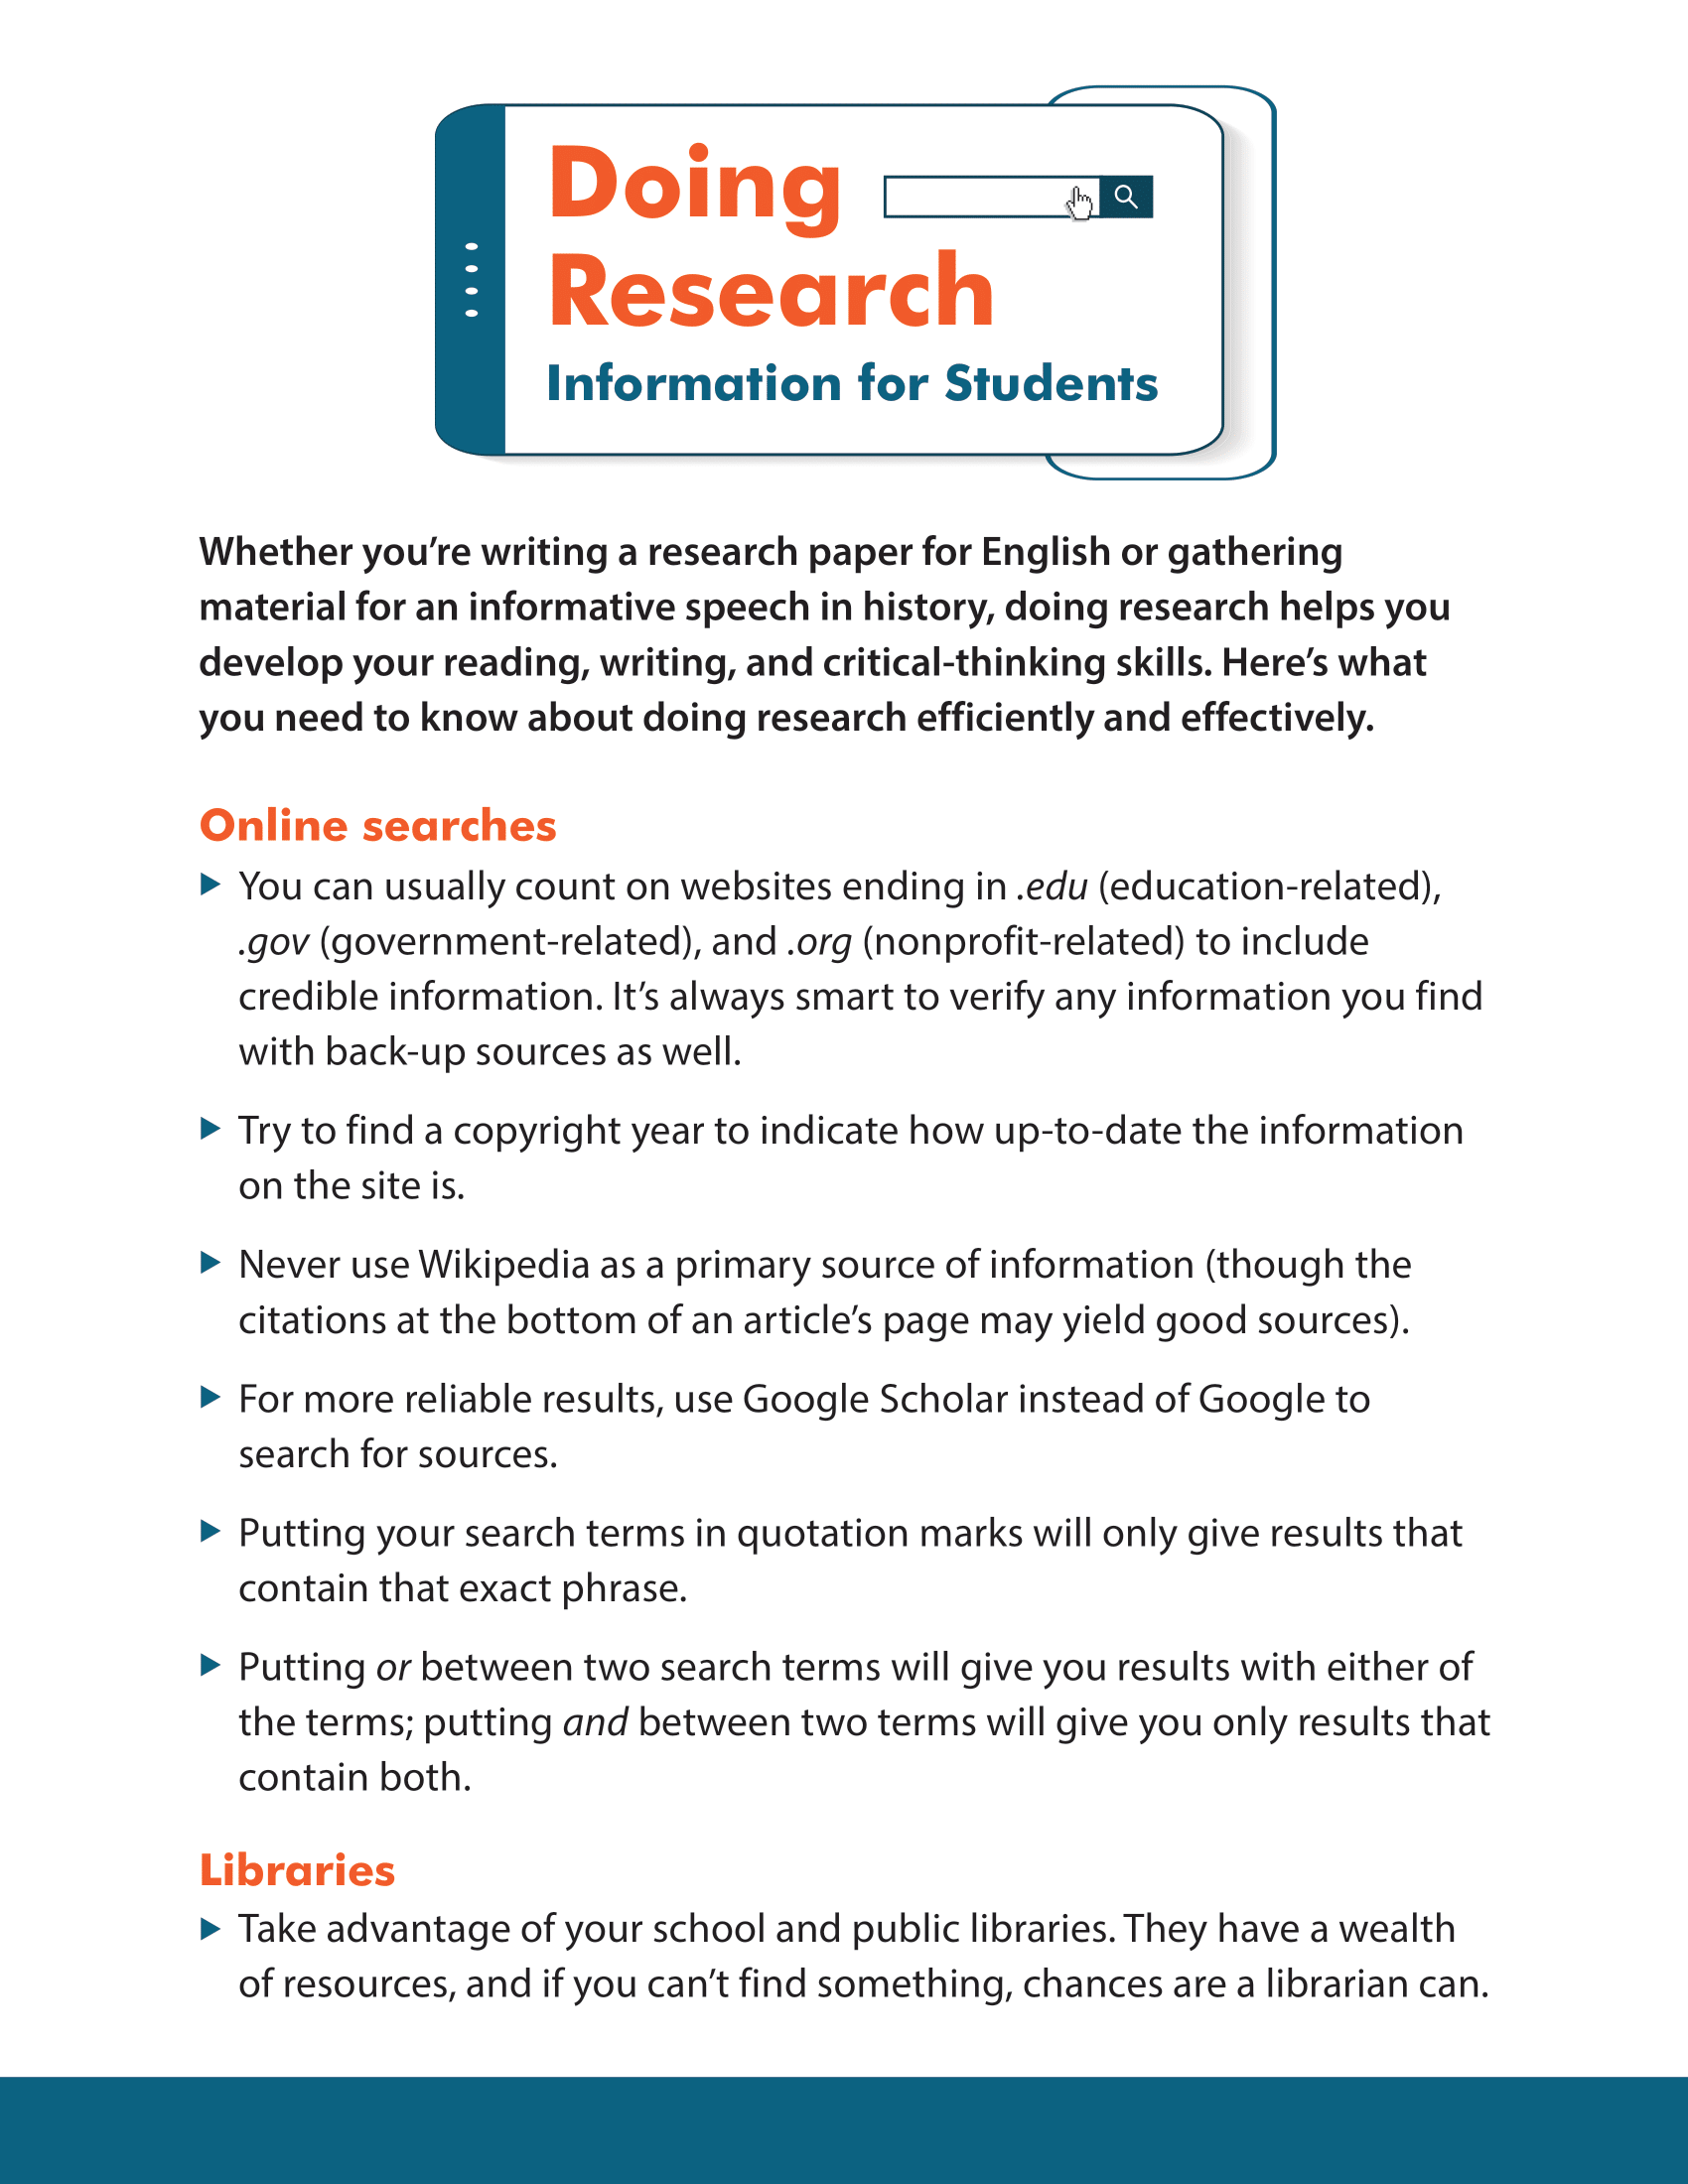 Doing Research - Information for Students